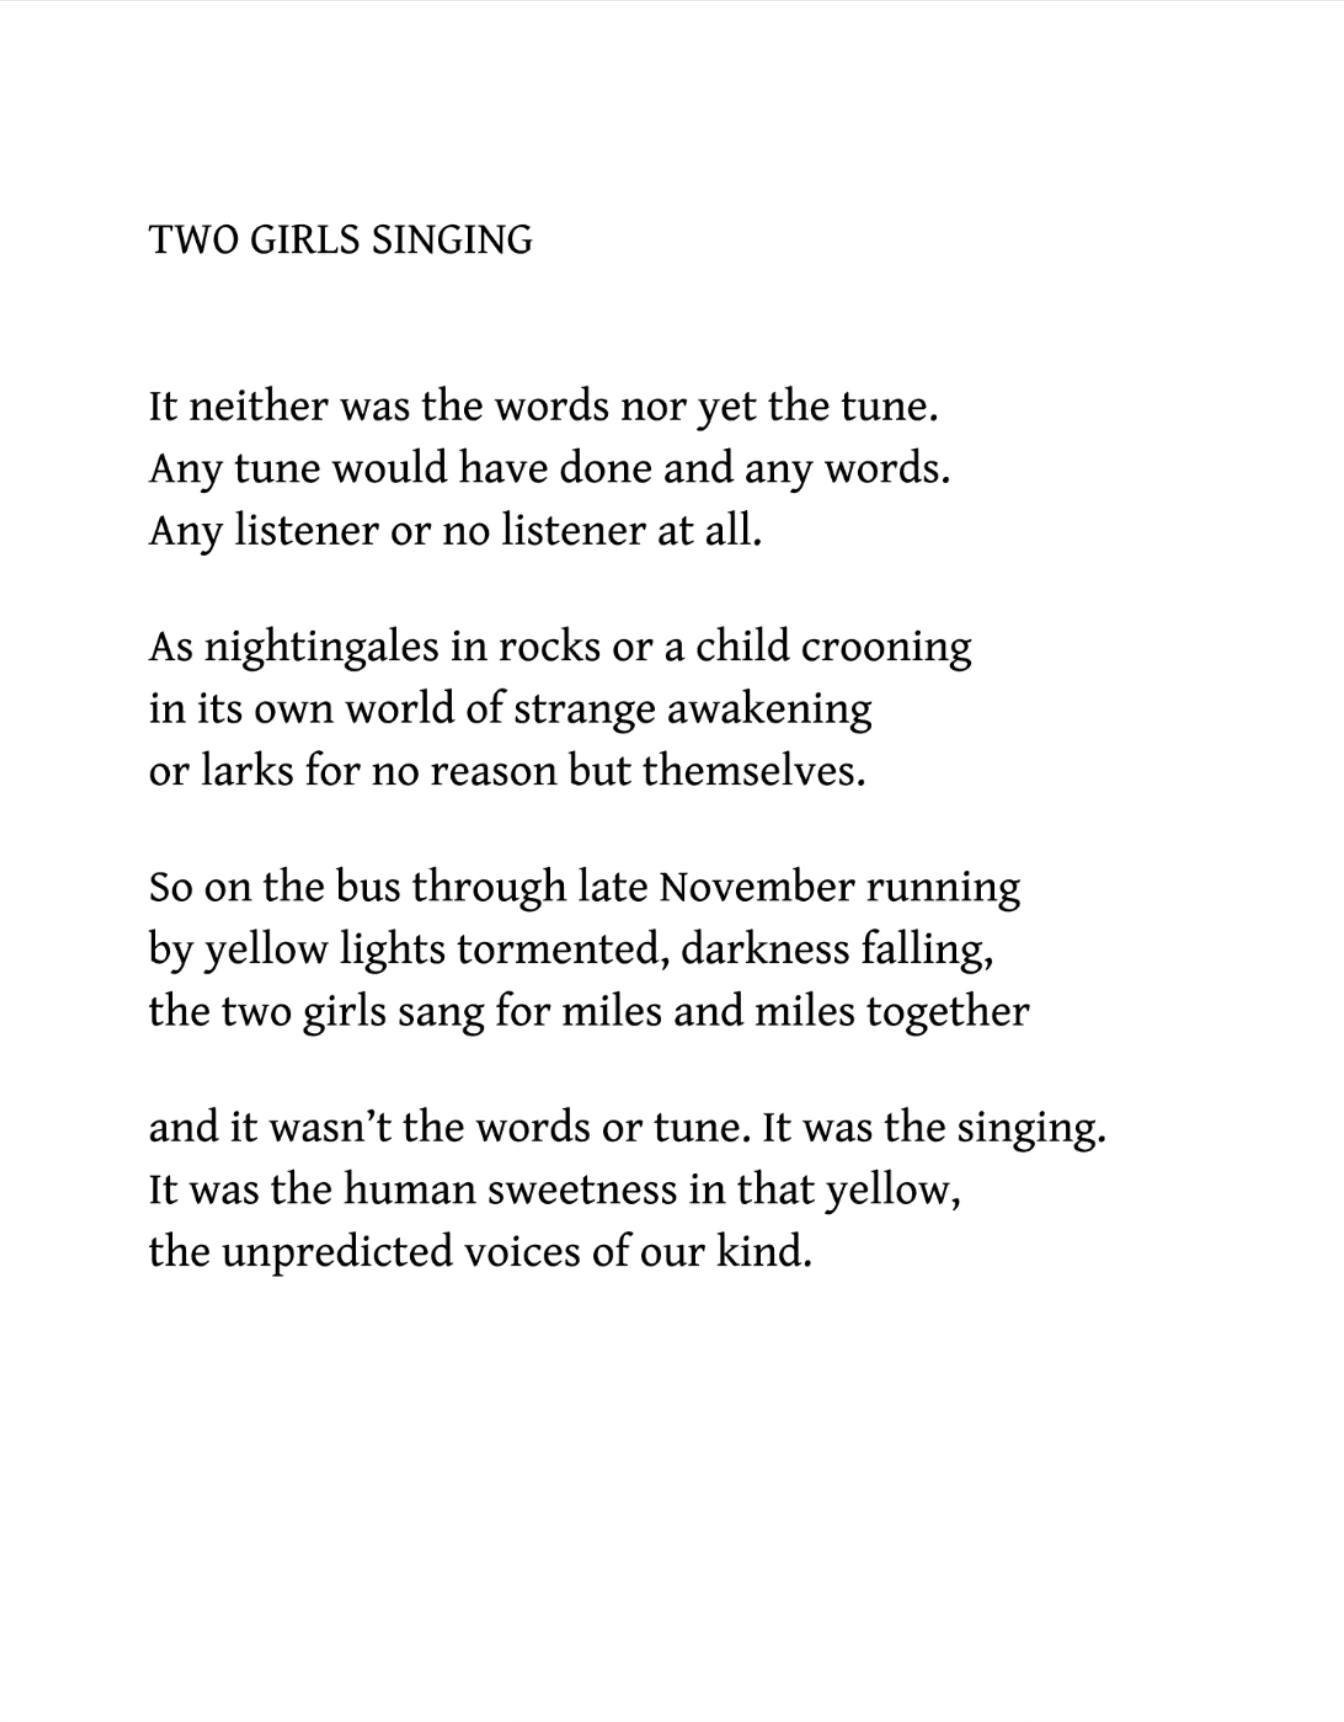 Iain Crichton Smith
“Two Girls Singing”

It neither was the words nor yet the tune.
Any tune would have done and any words.
Any listener or no listener at all.

As nightingales in rocks or a child crooning
in its own world of strange awakening
or larks for no reason but themselves.

So on the bus through late November running
by yellow lights tormented, darkness falling,
the two girls sang for miles and miles together

and it wasn’t the words or tune. It was the singing.
It was the human sweetness in that yellow,
the unpredicted voices of our kind.